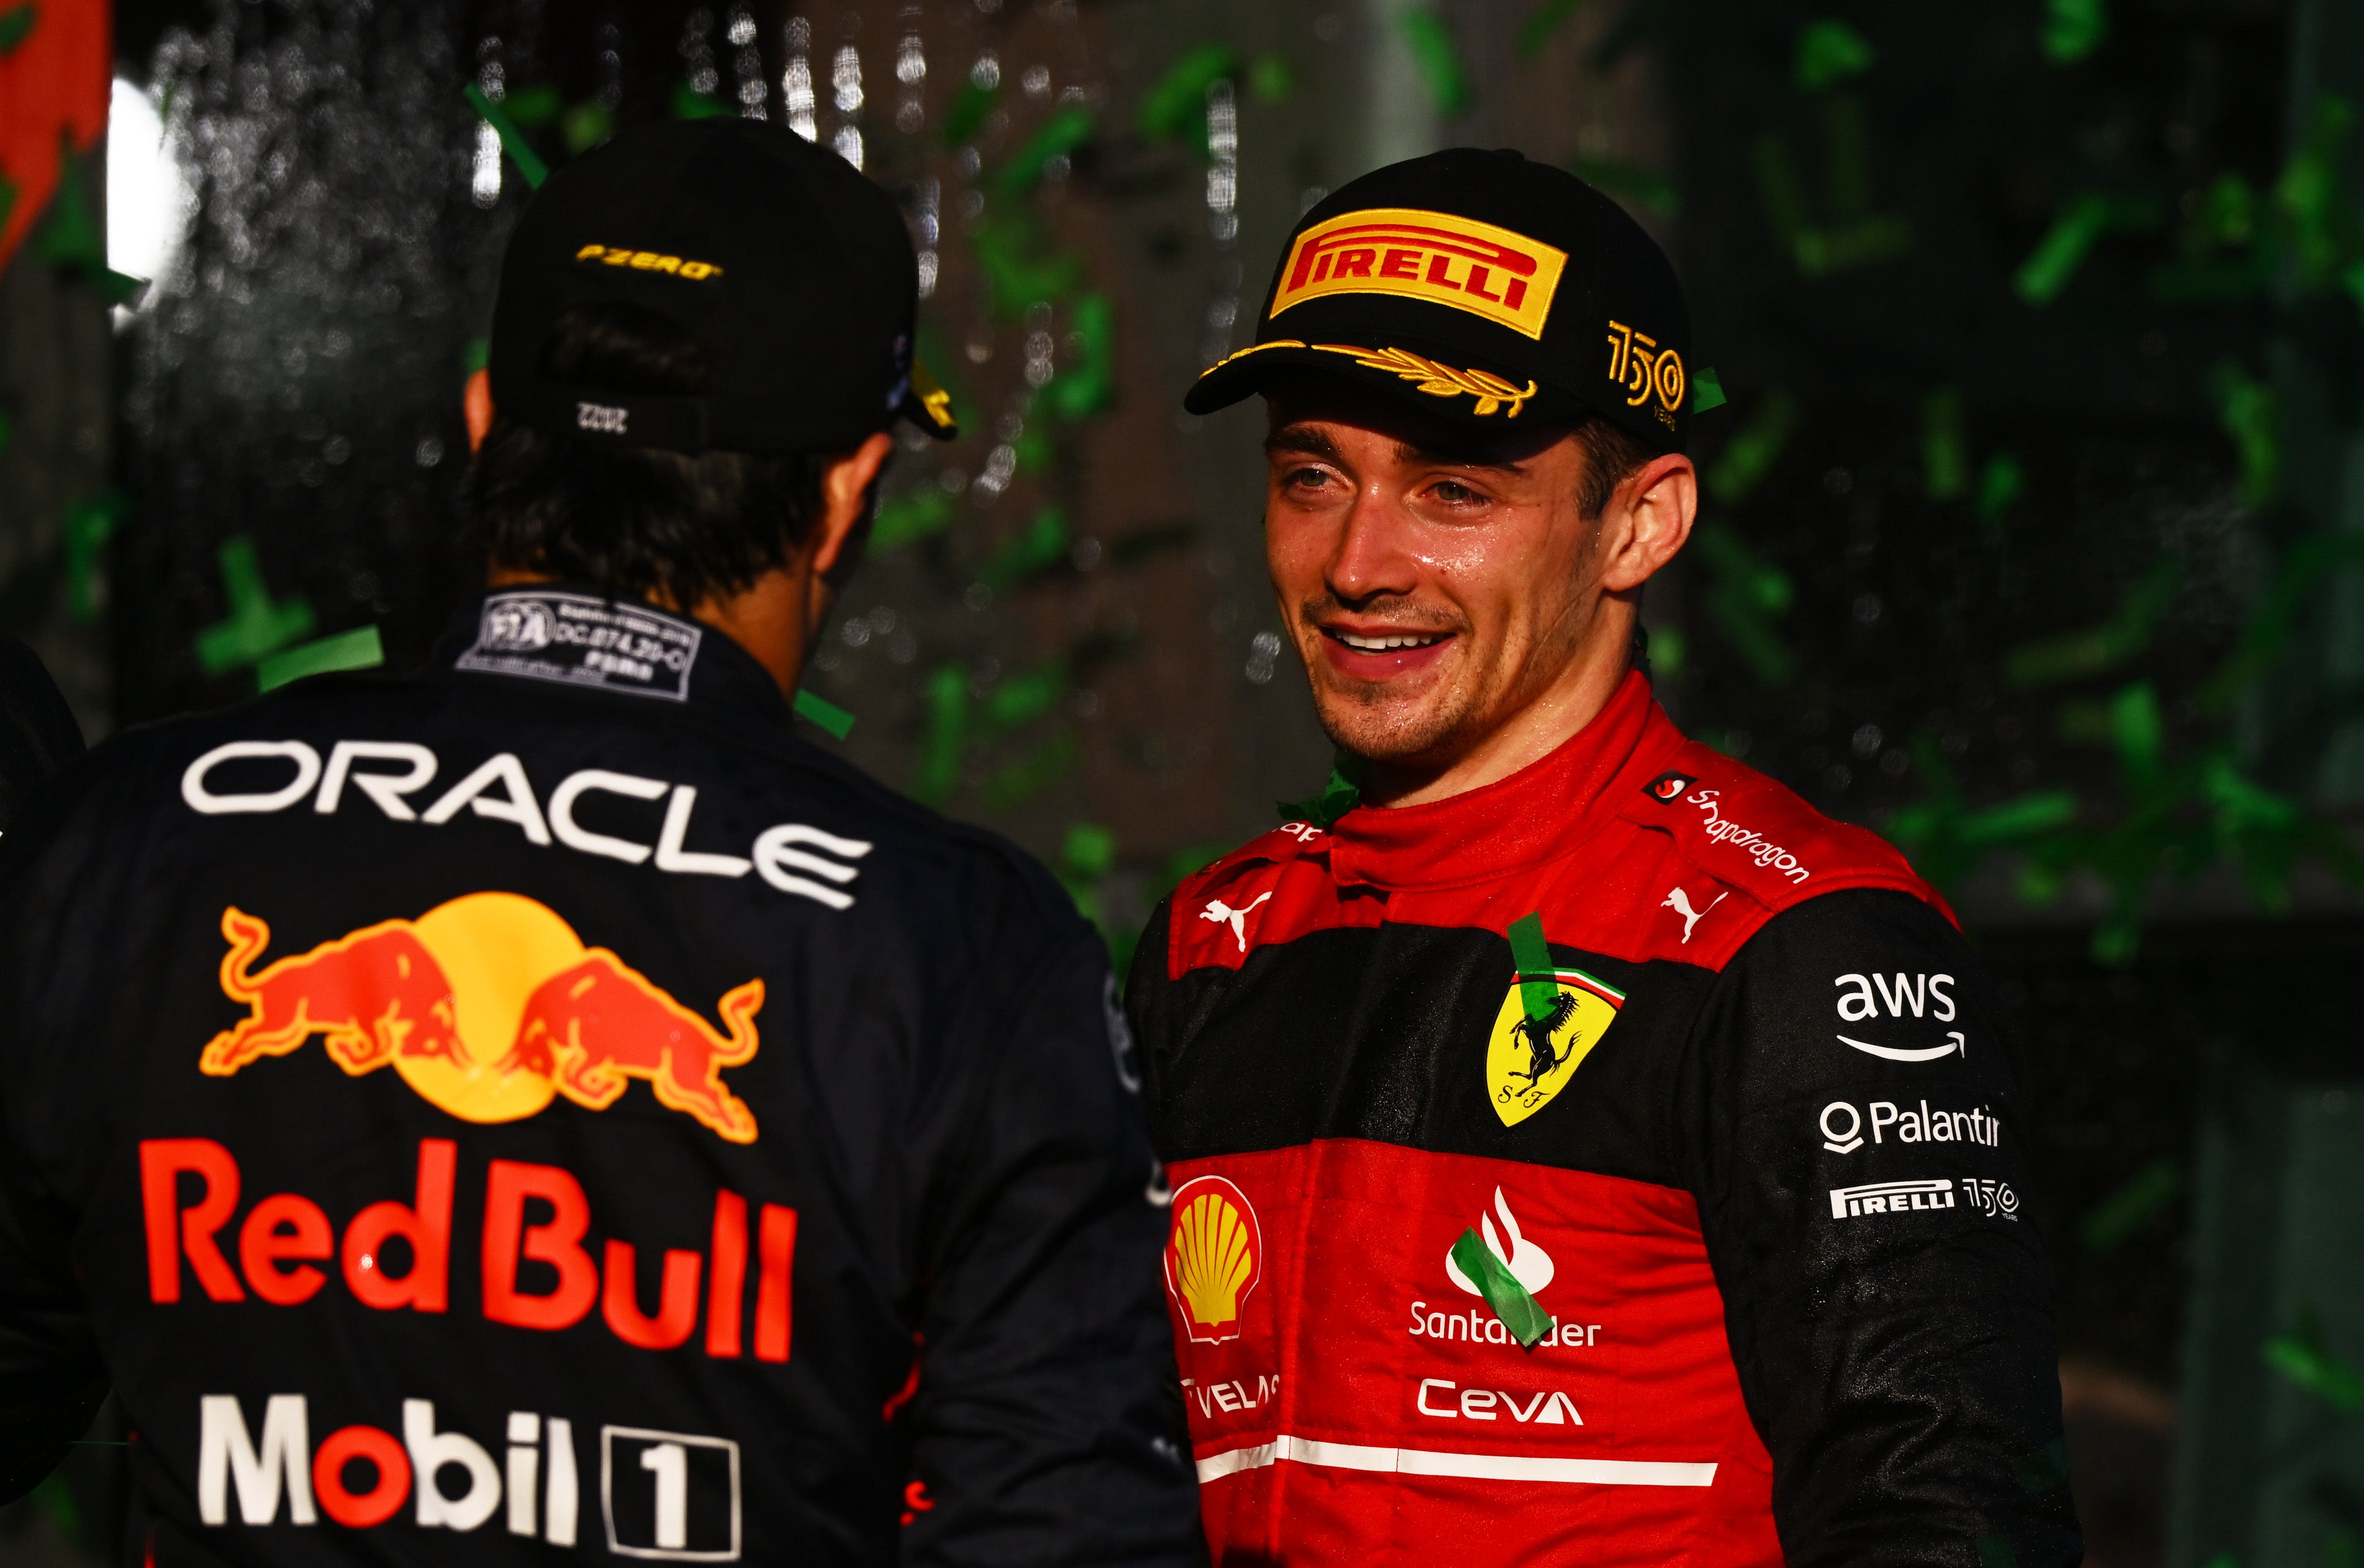 Charles Leclerc won his second race of the season in Australia.